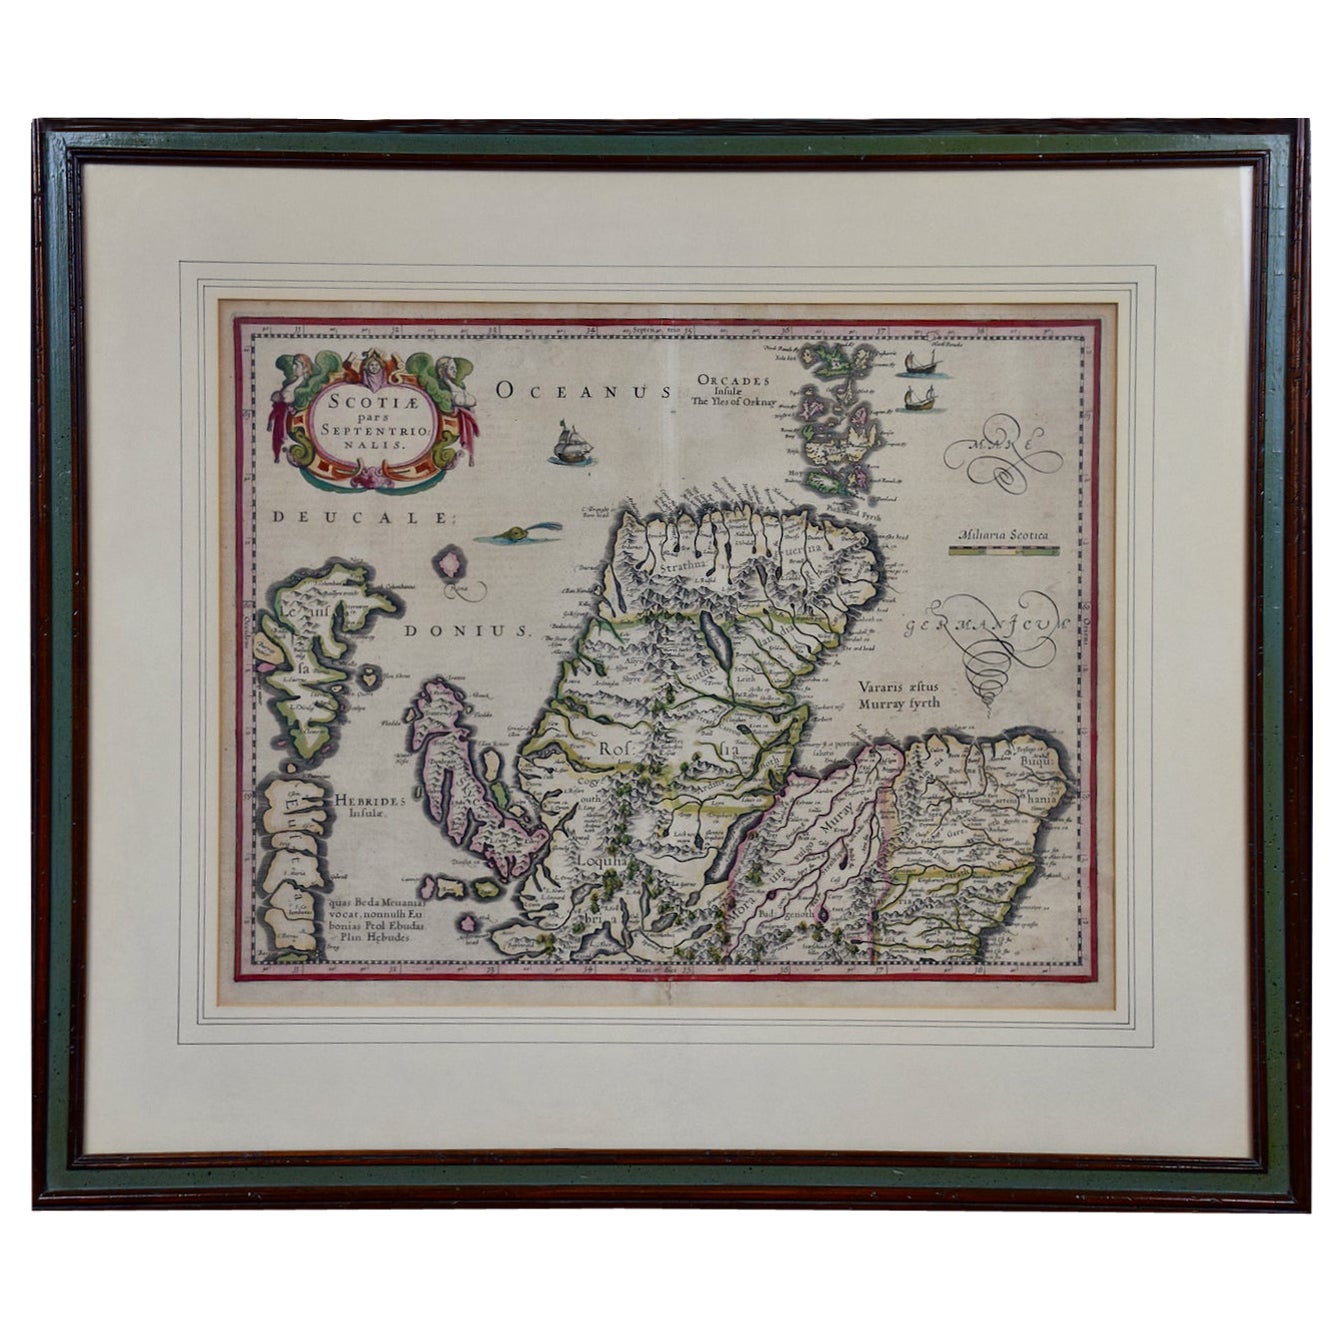 17th Century Hand-Colored Map of Northern Scotland by Mercator